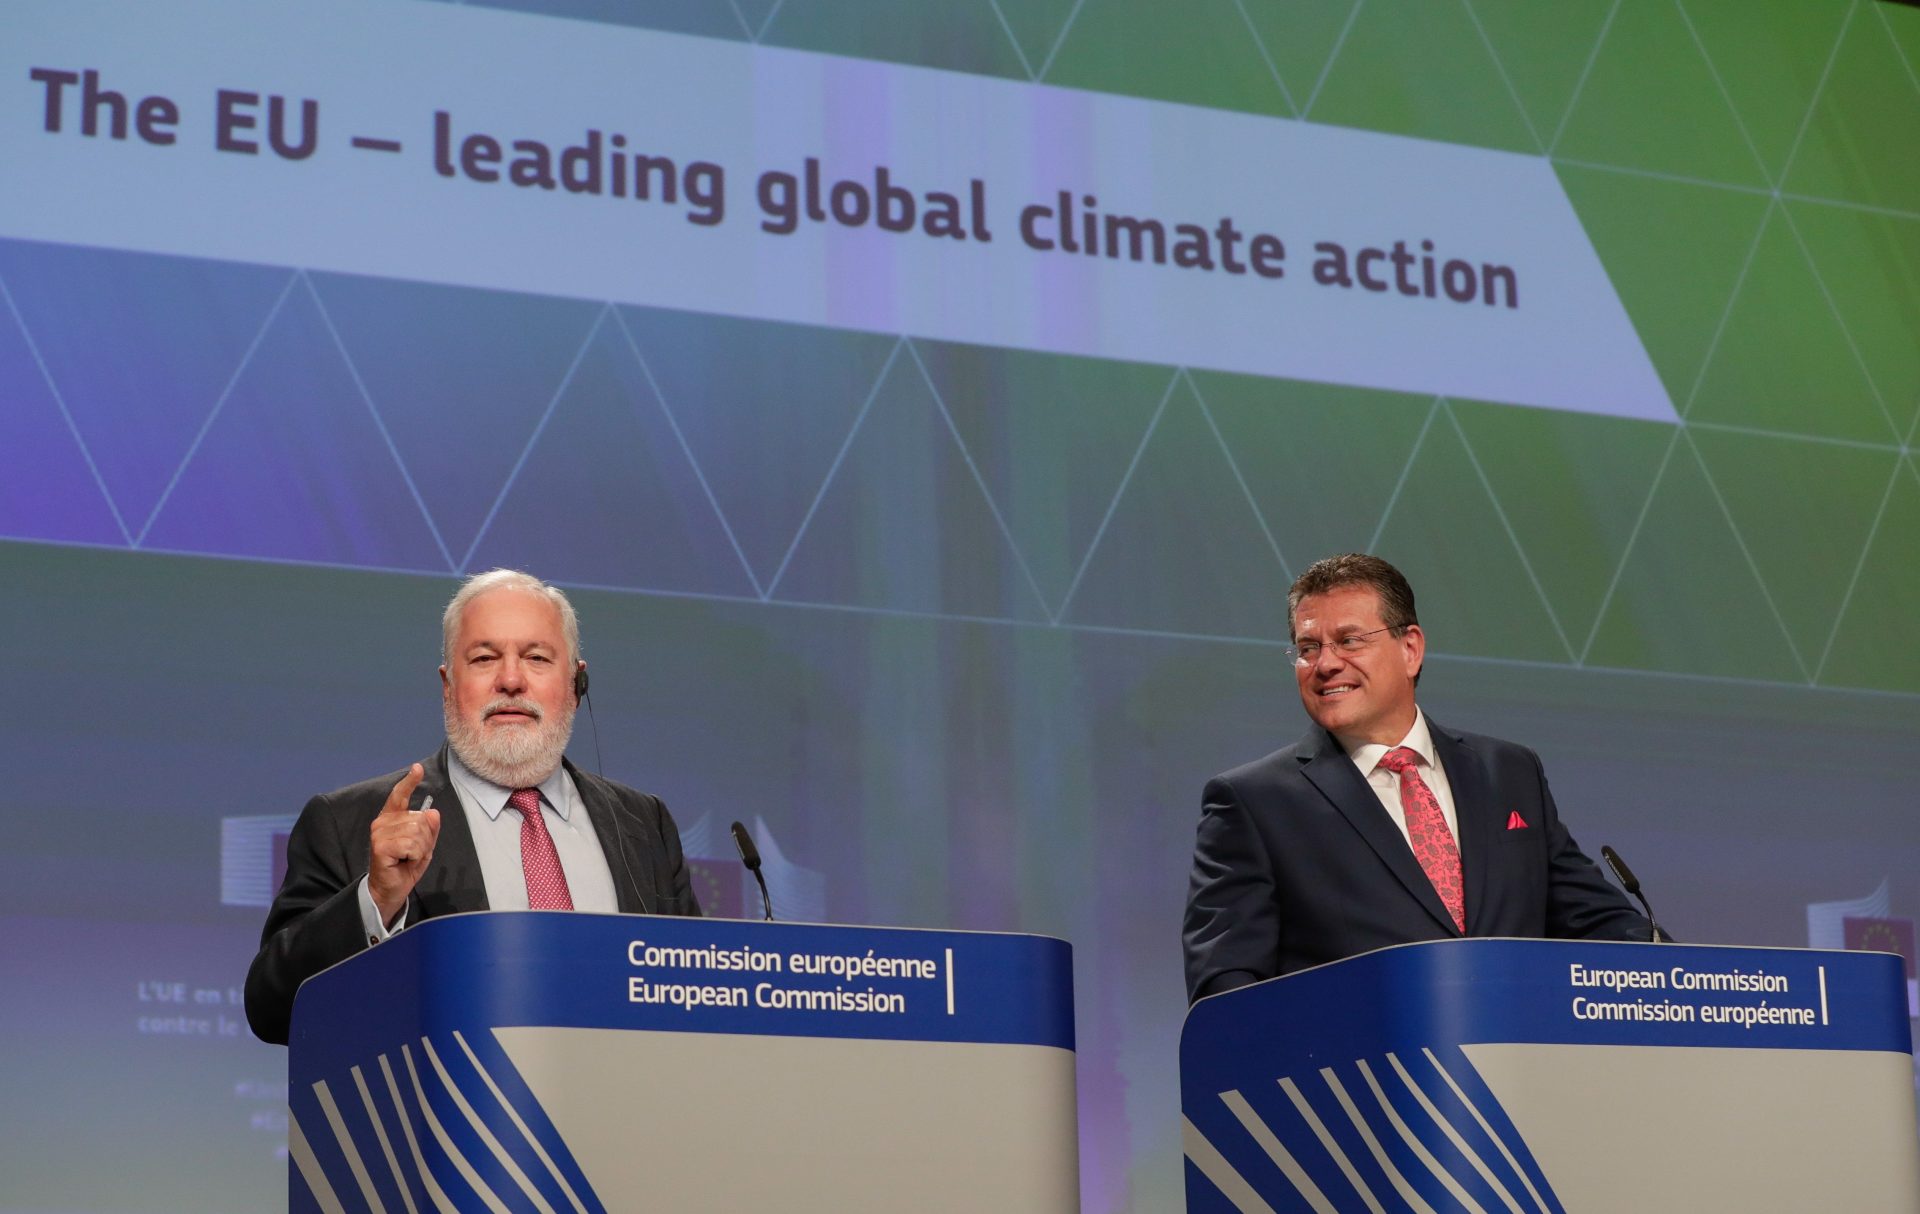 The EU- leading global climate action press conference